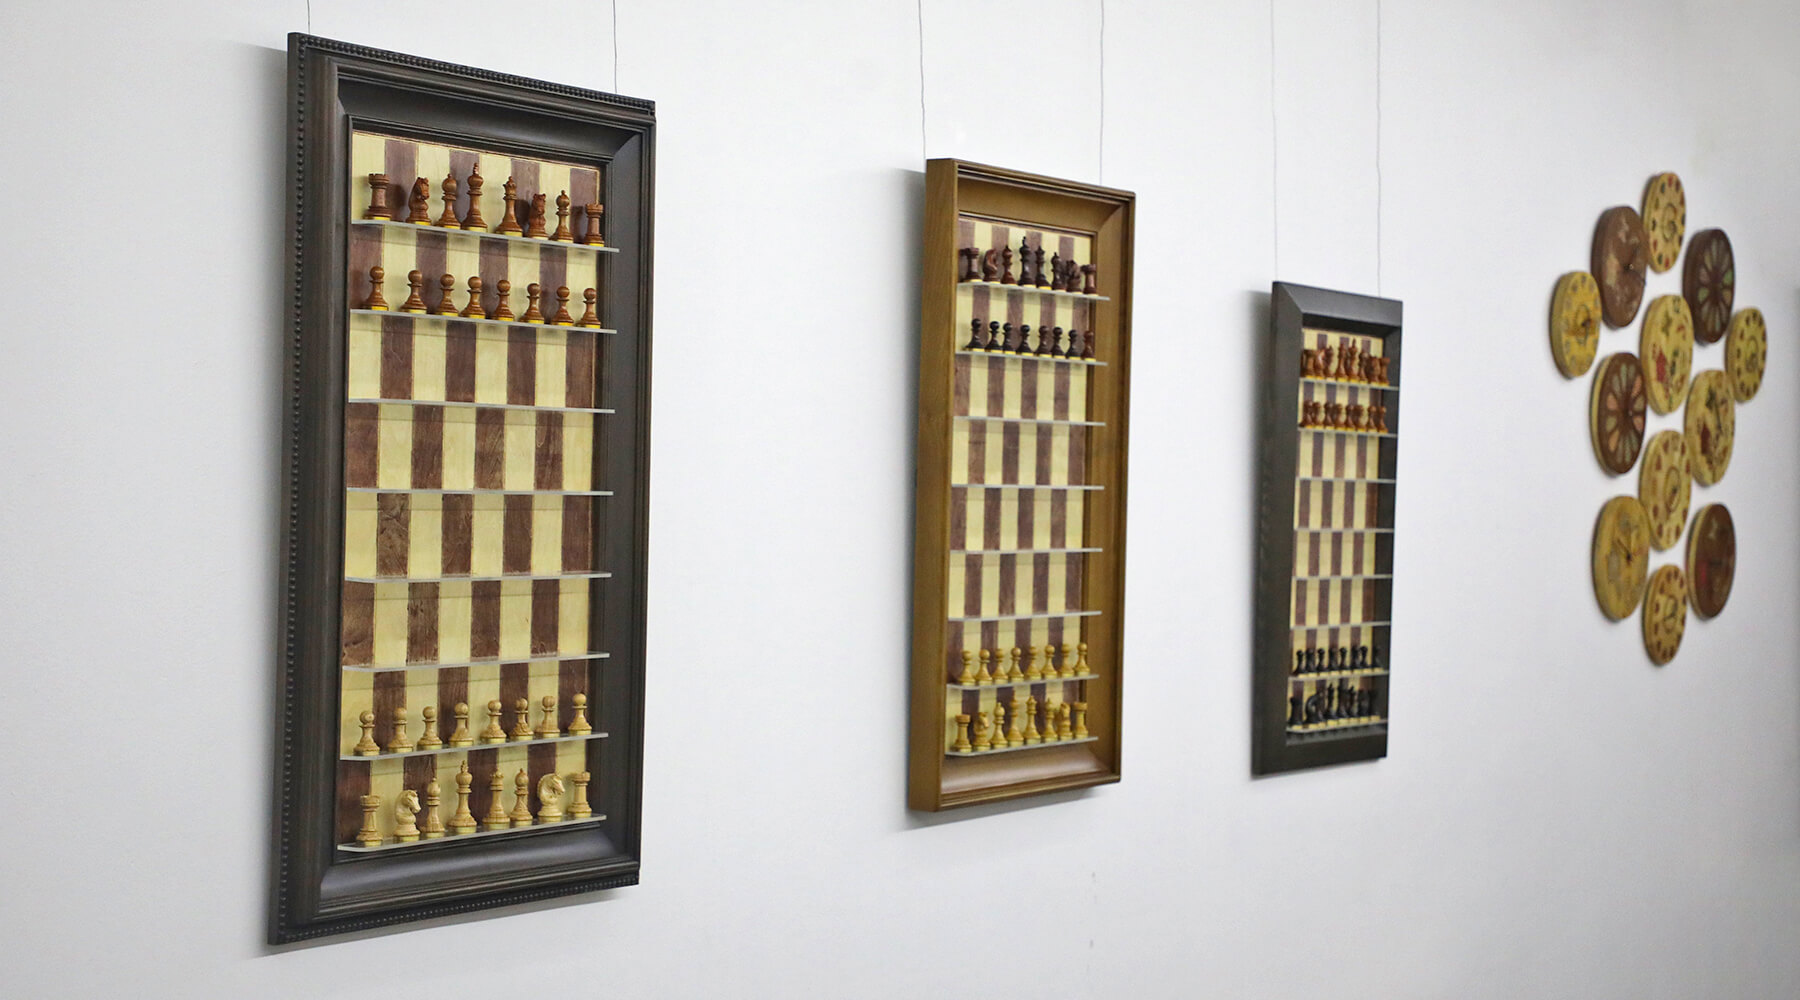 Vertical Wooden Chess Pieces and Boards